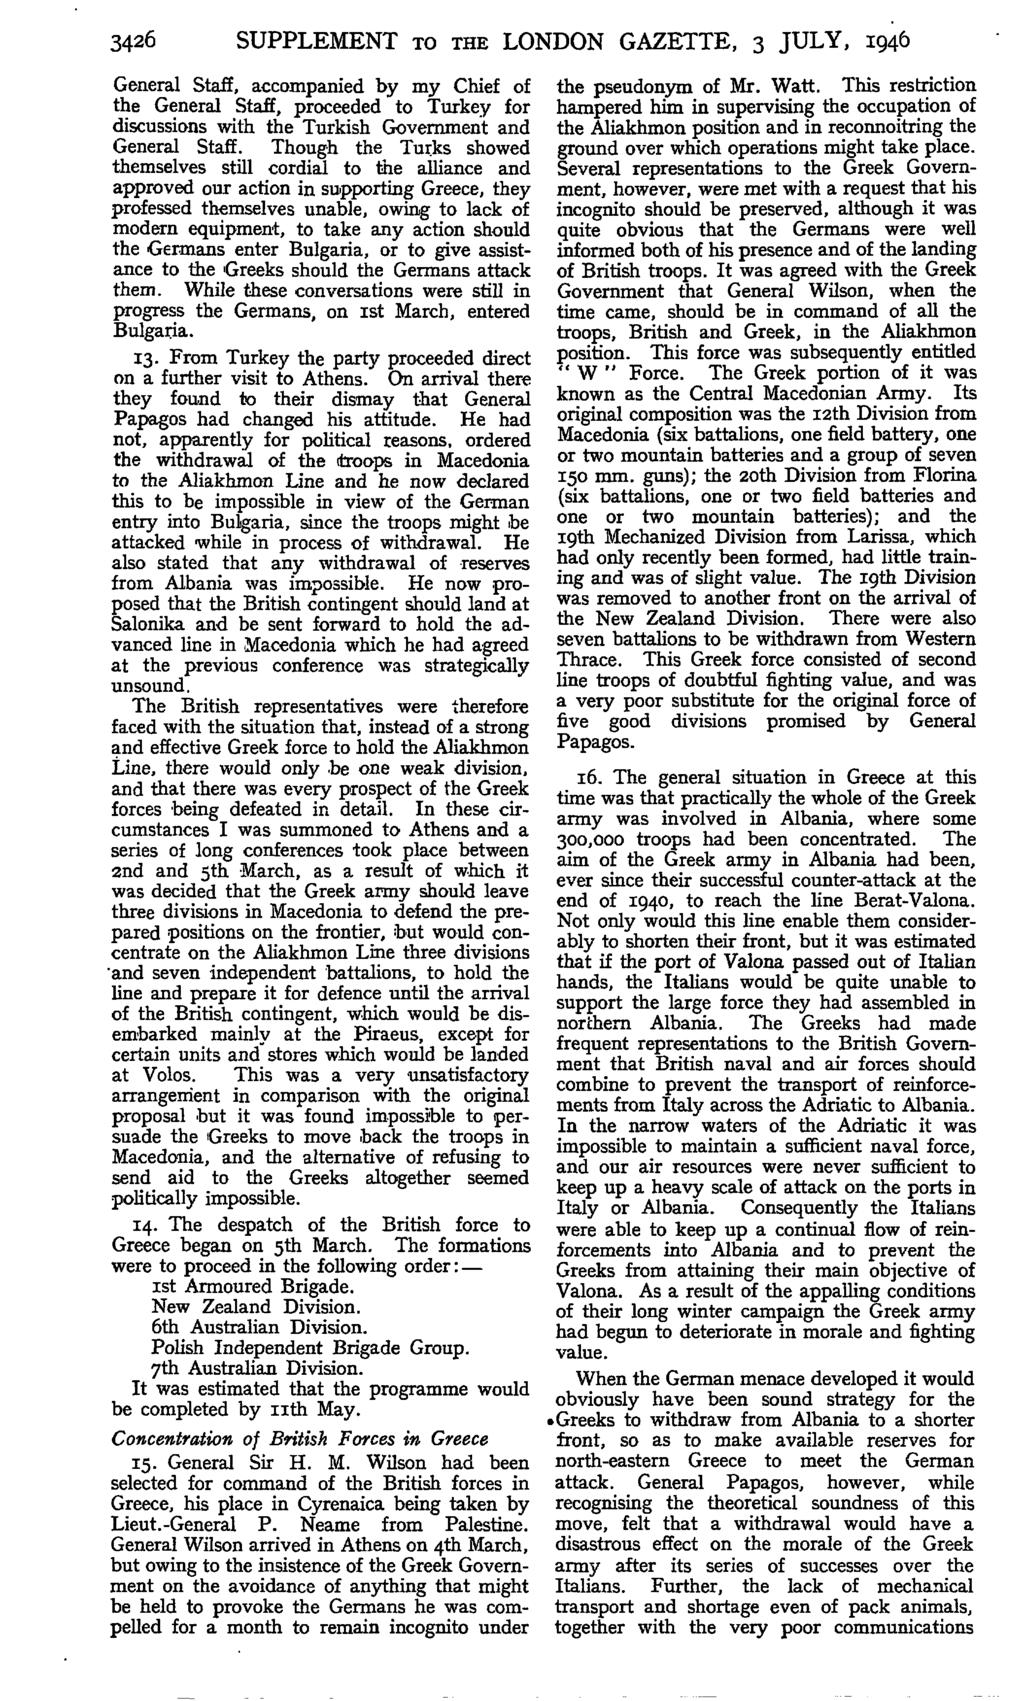 3426 SUPPLEMENT TO THE LONDON GAZETTE, 3 JULY, 1946 General Staff, accompanied by my Chief of the General Staff, proceeded to Turkey for discussions with the Turkish Government and General Staff.